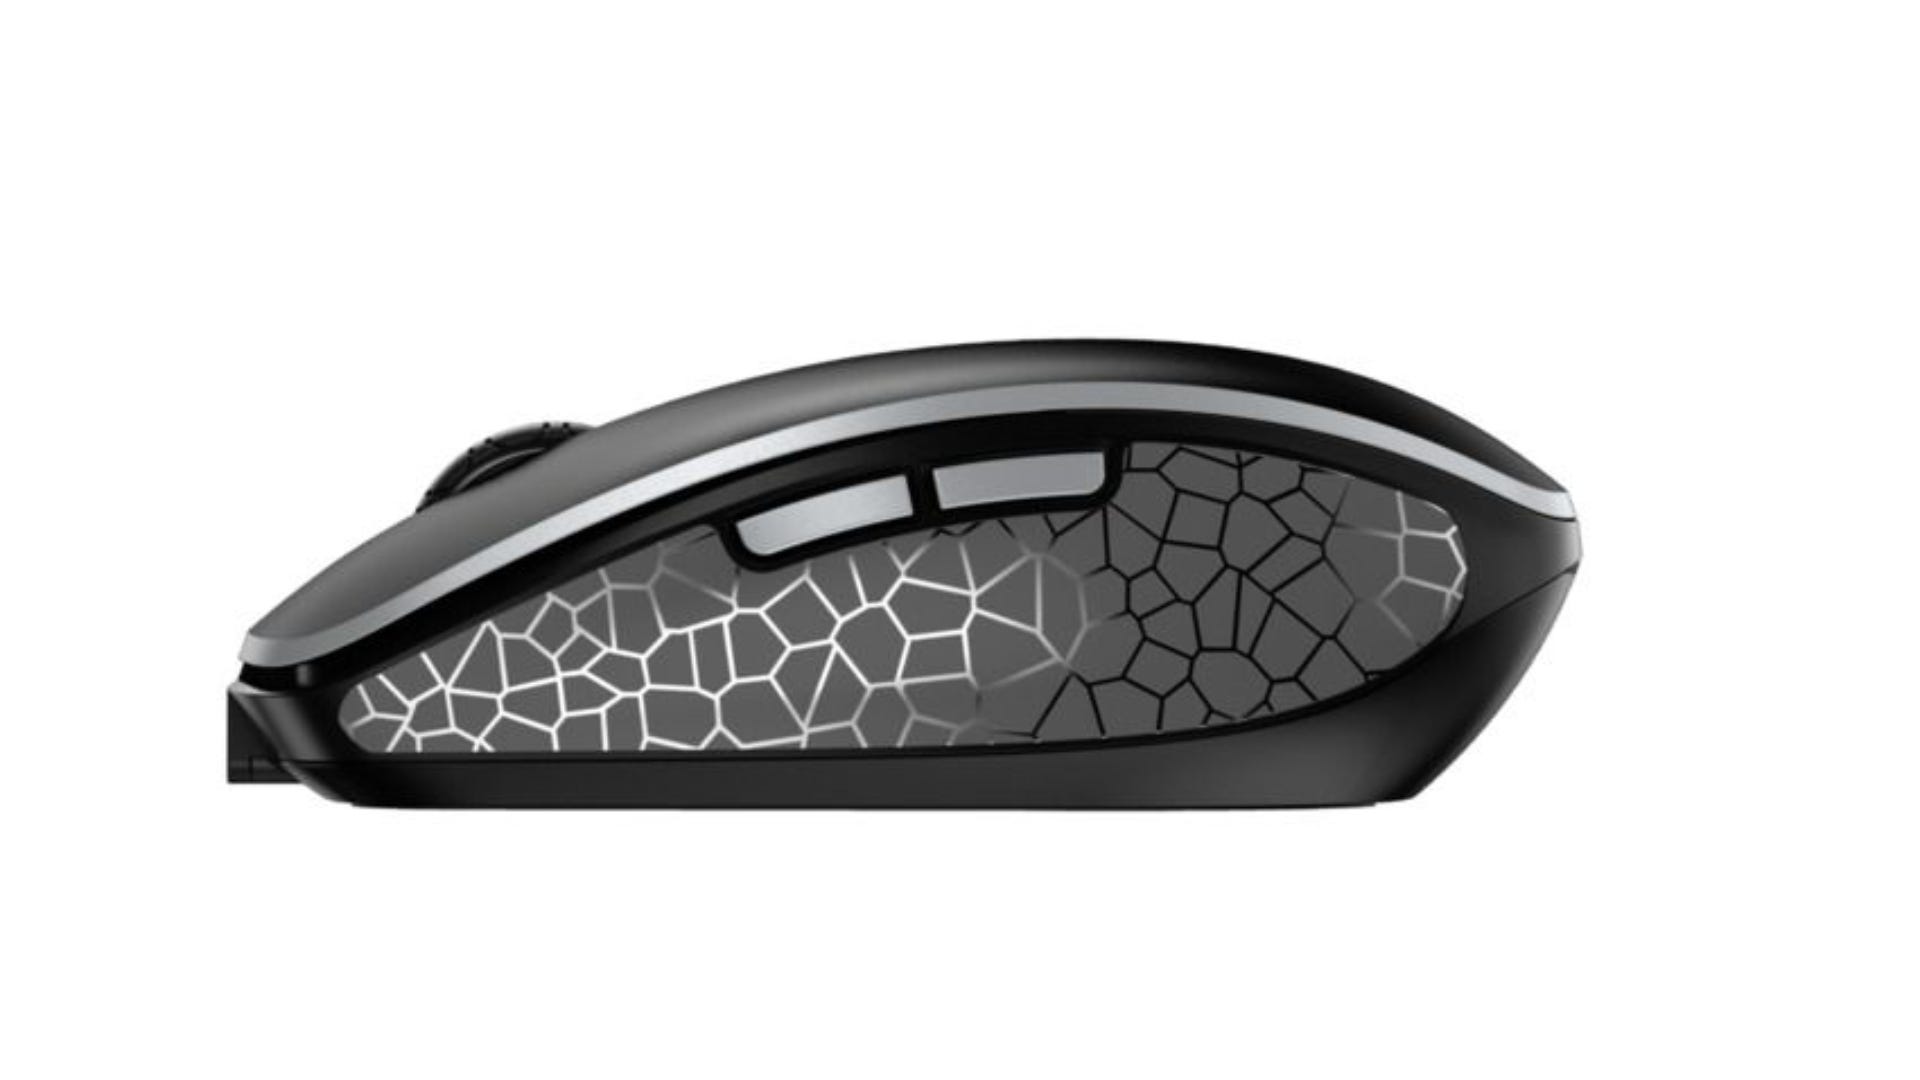 CHERRY MW 9100 Mouse sideview